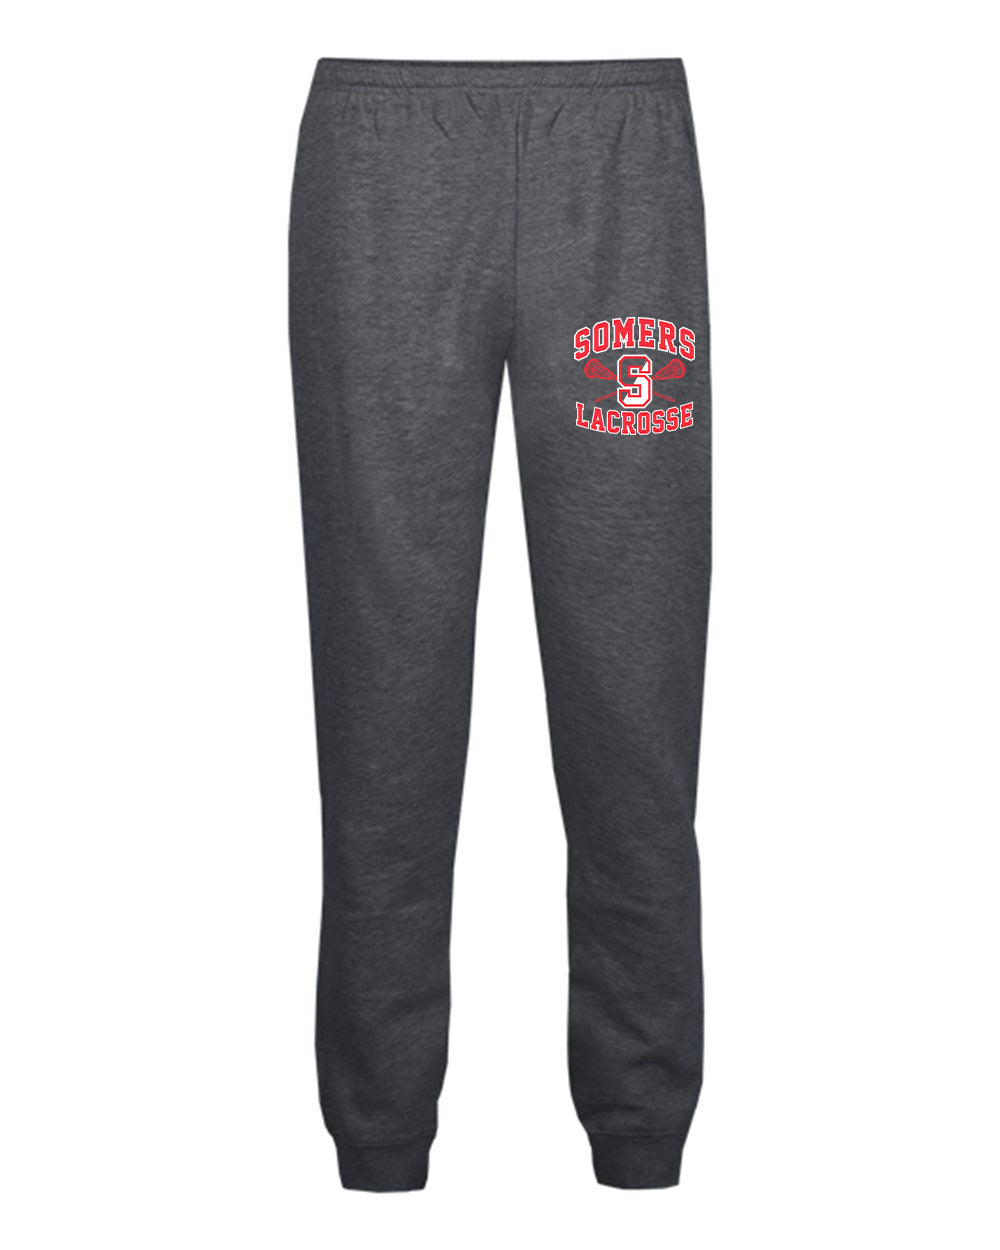 Somers YL Youth Badger Fleece Joggers - 2215 (color options available)